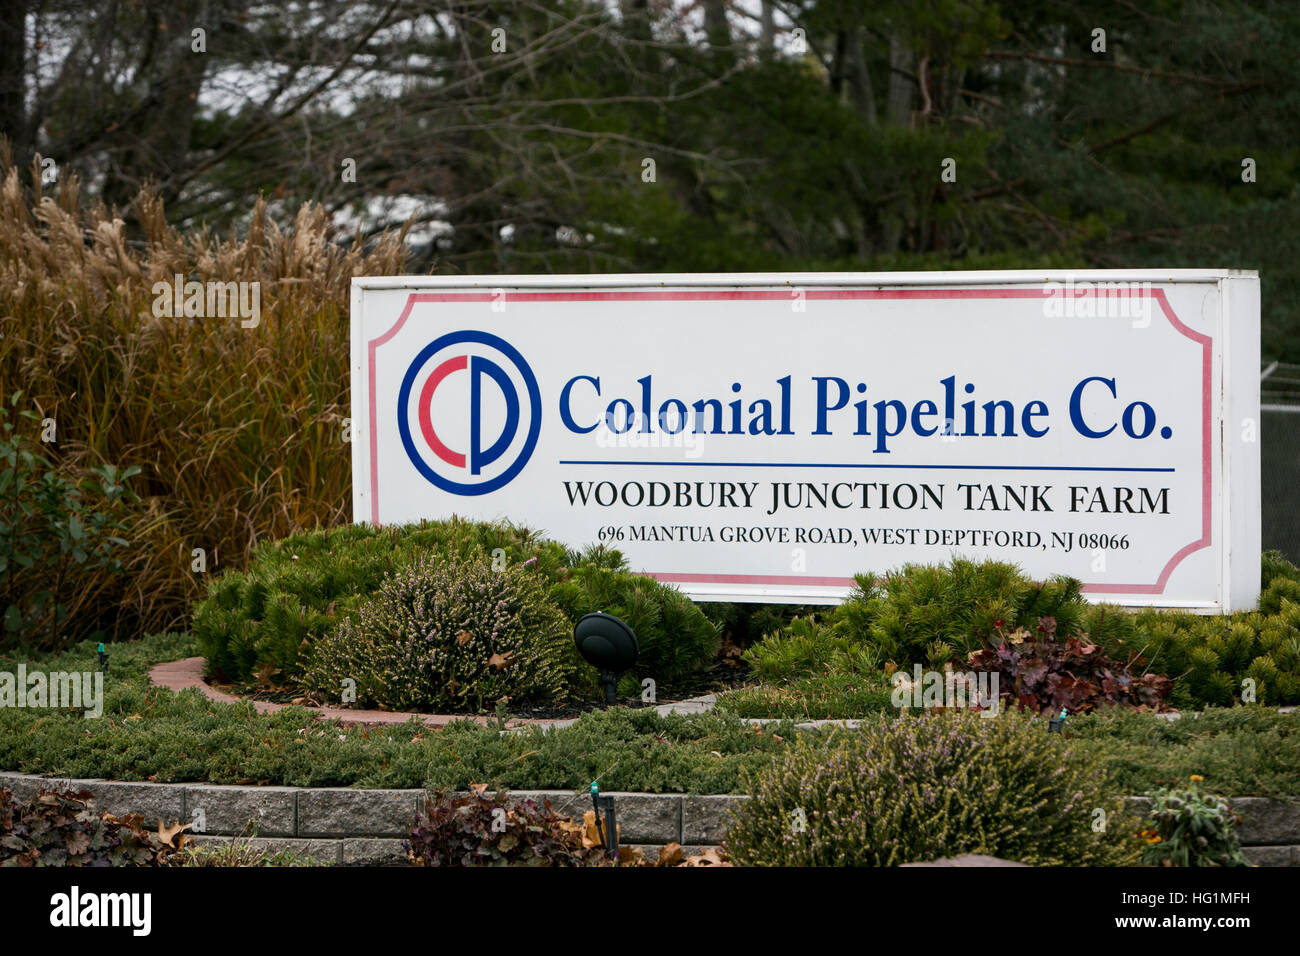 A logo sign outside of a Colonial Pipeline Company Tank Farm in Paulsboro, New Jersey on December 11, 2016. Stock Photo